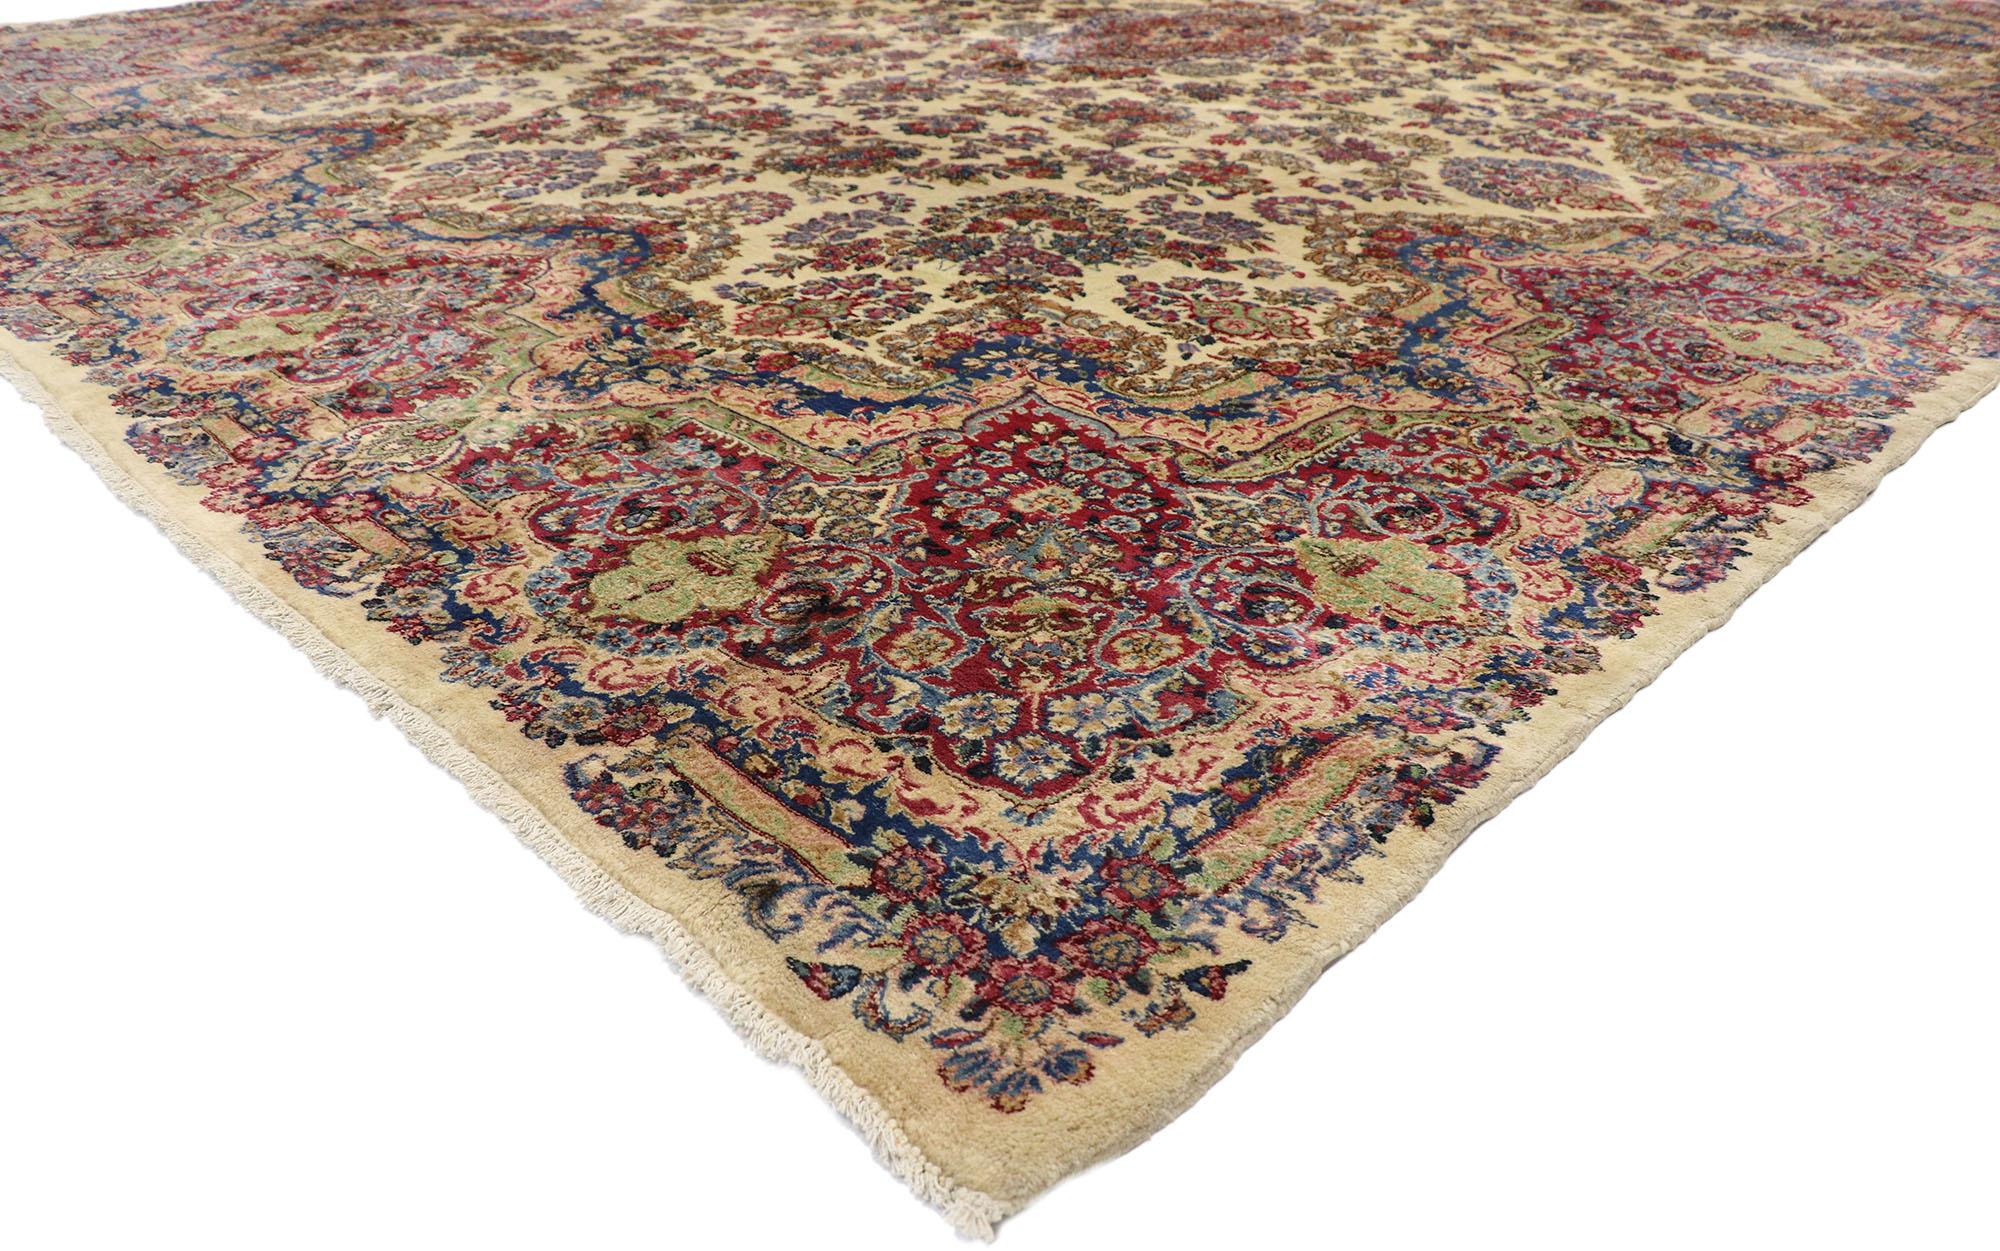 76758, antique Persian Kerman rug with French Victorian style, antique Kirman rug. With an impressive array of realistic floral elements and a refined color palette, this hand knotted wool antique Persian Kerman palace rug charms with ease and